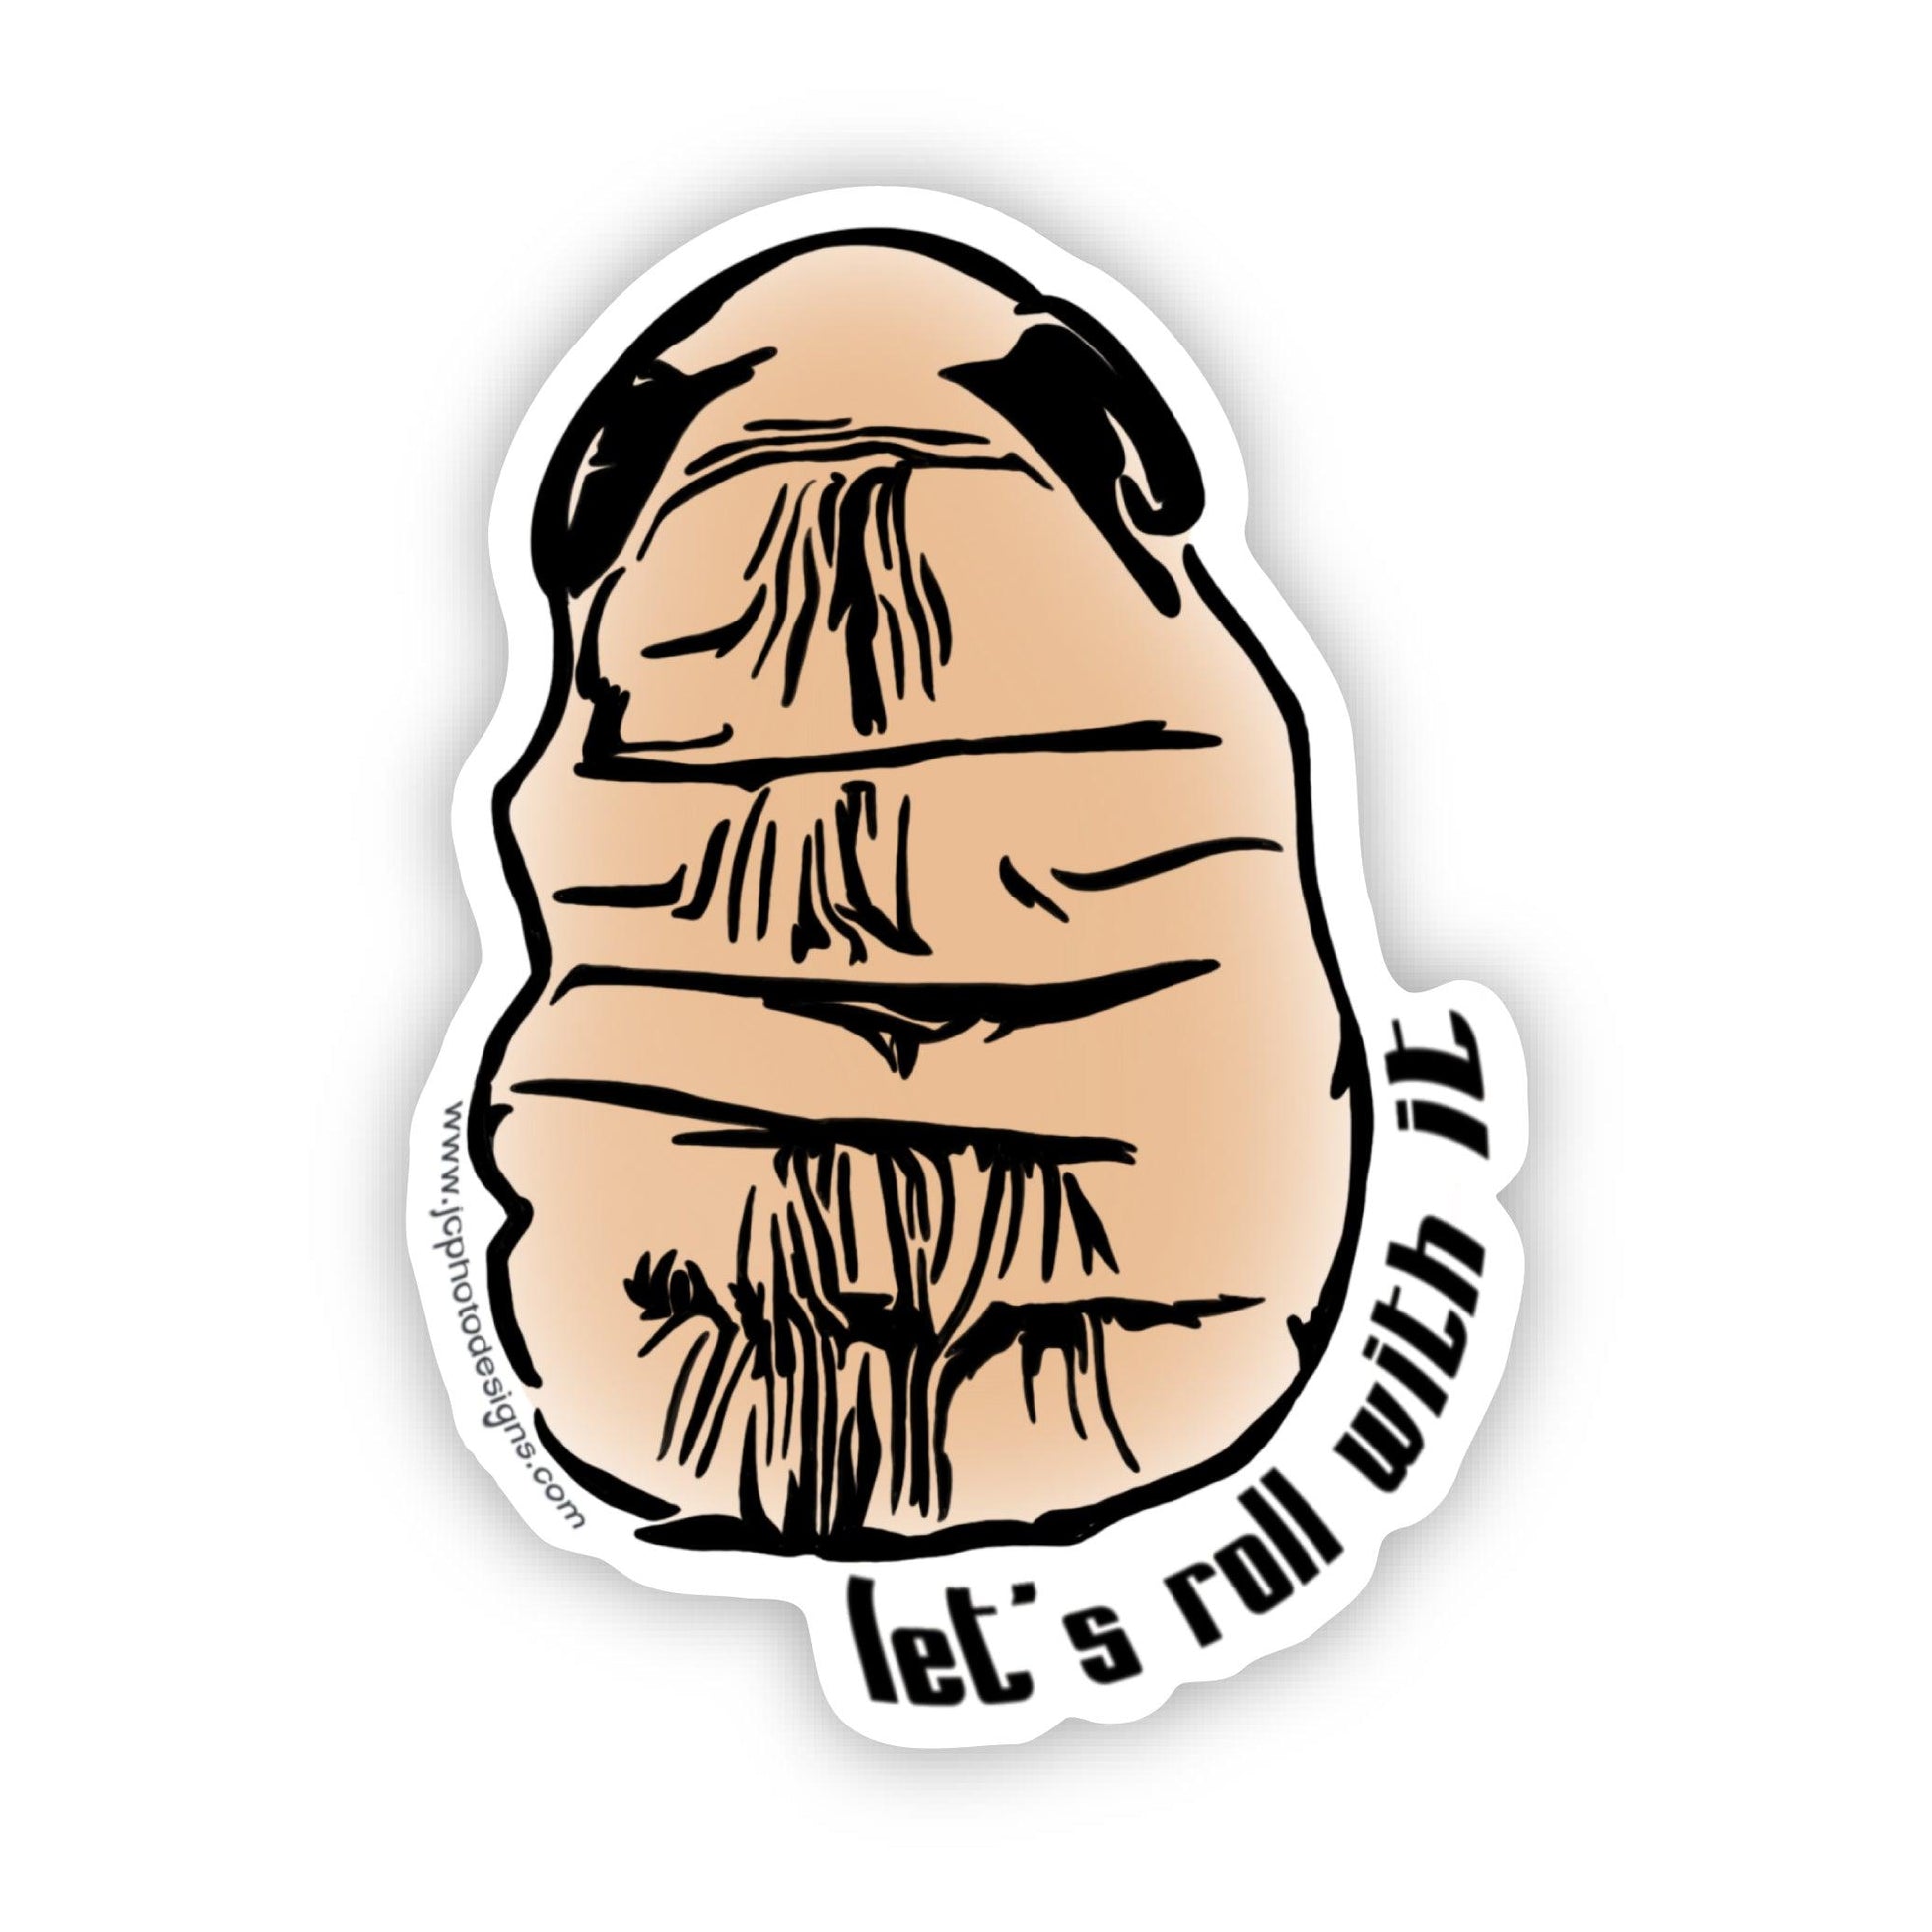 Let’s Roll with It Pug Sticker – Quirky Dog Phrase Sticker - JC Designs